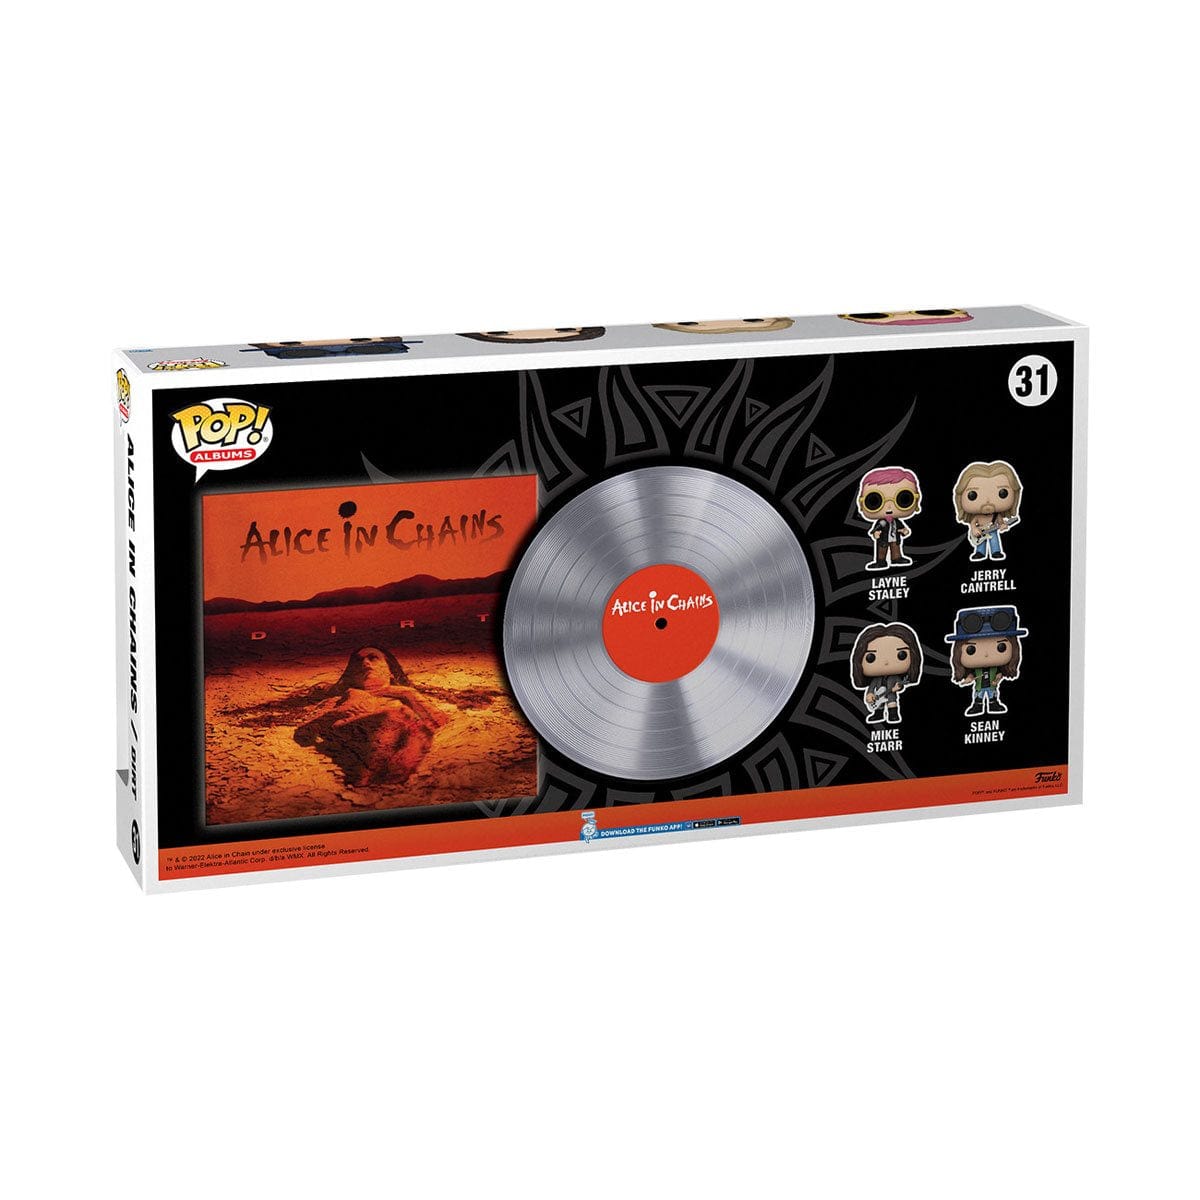 Alice in Chains Dirt Deluxe Pop! Album Figure with Case back of box image art 